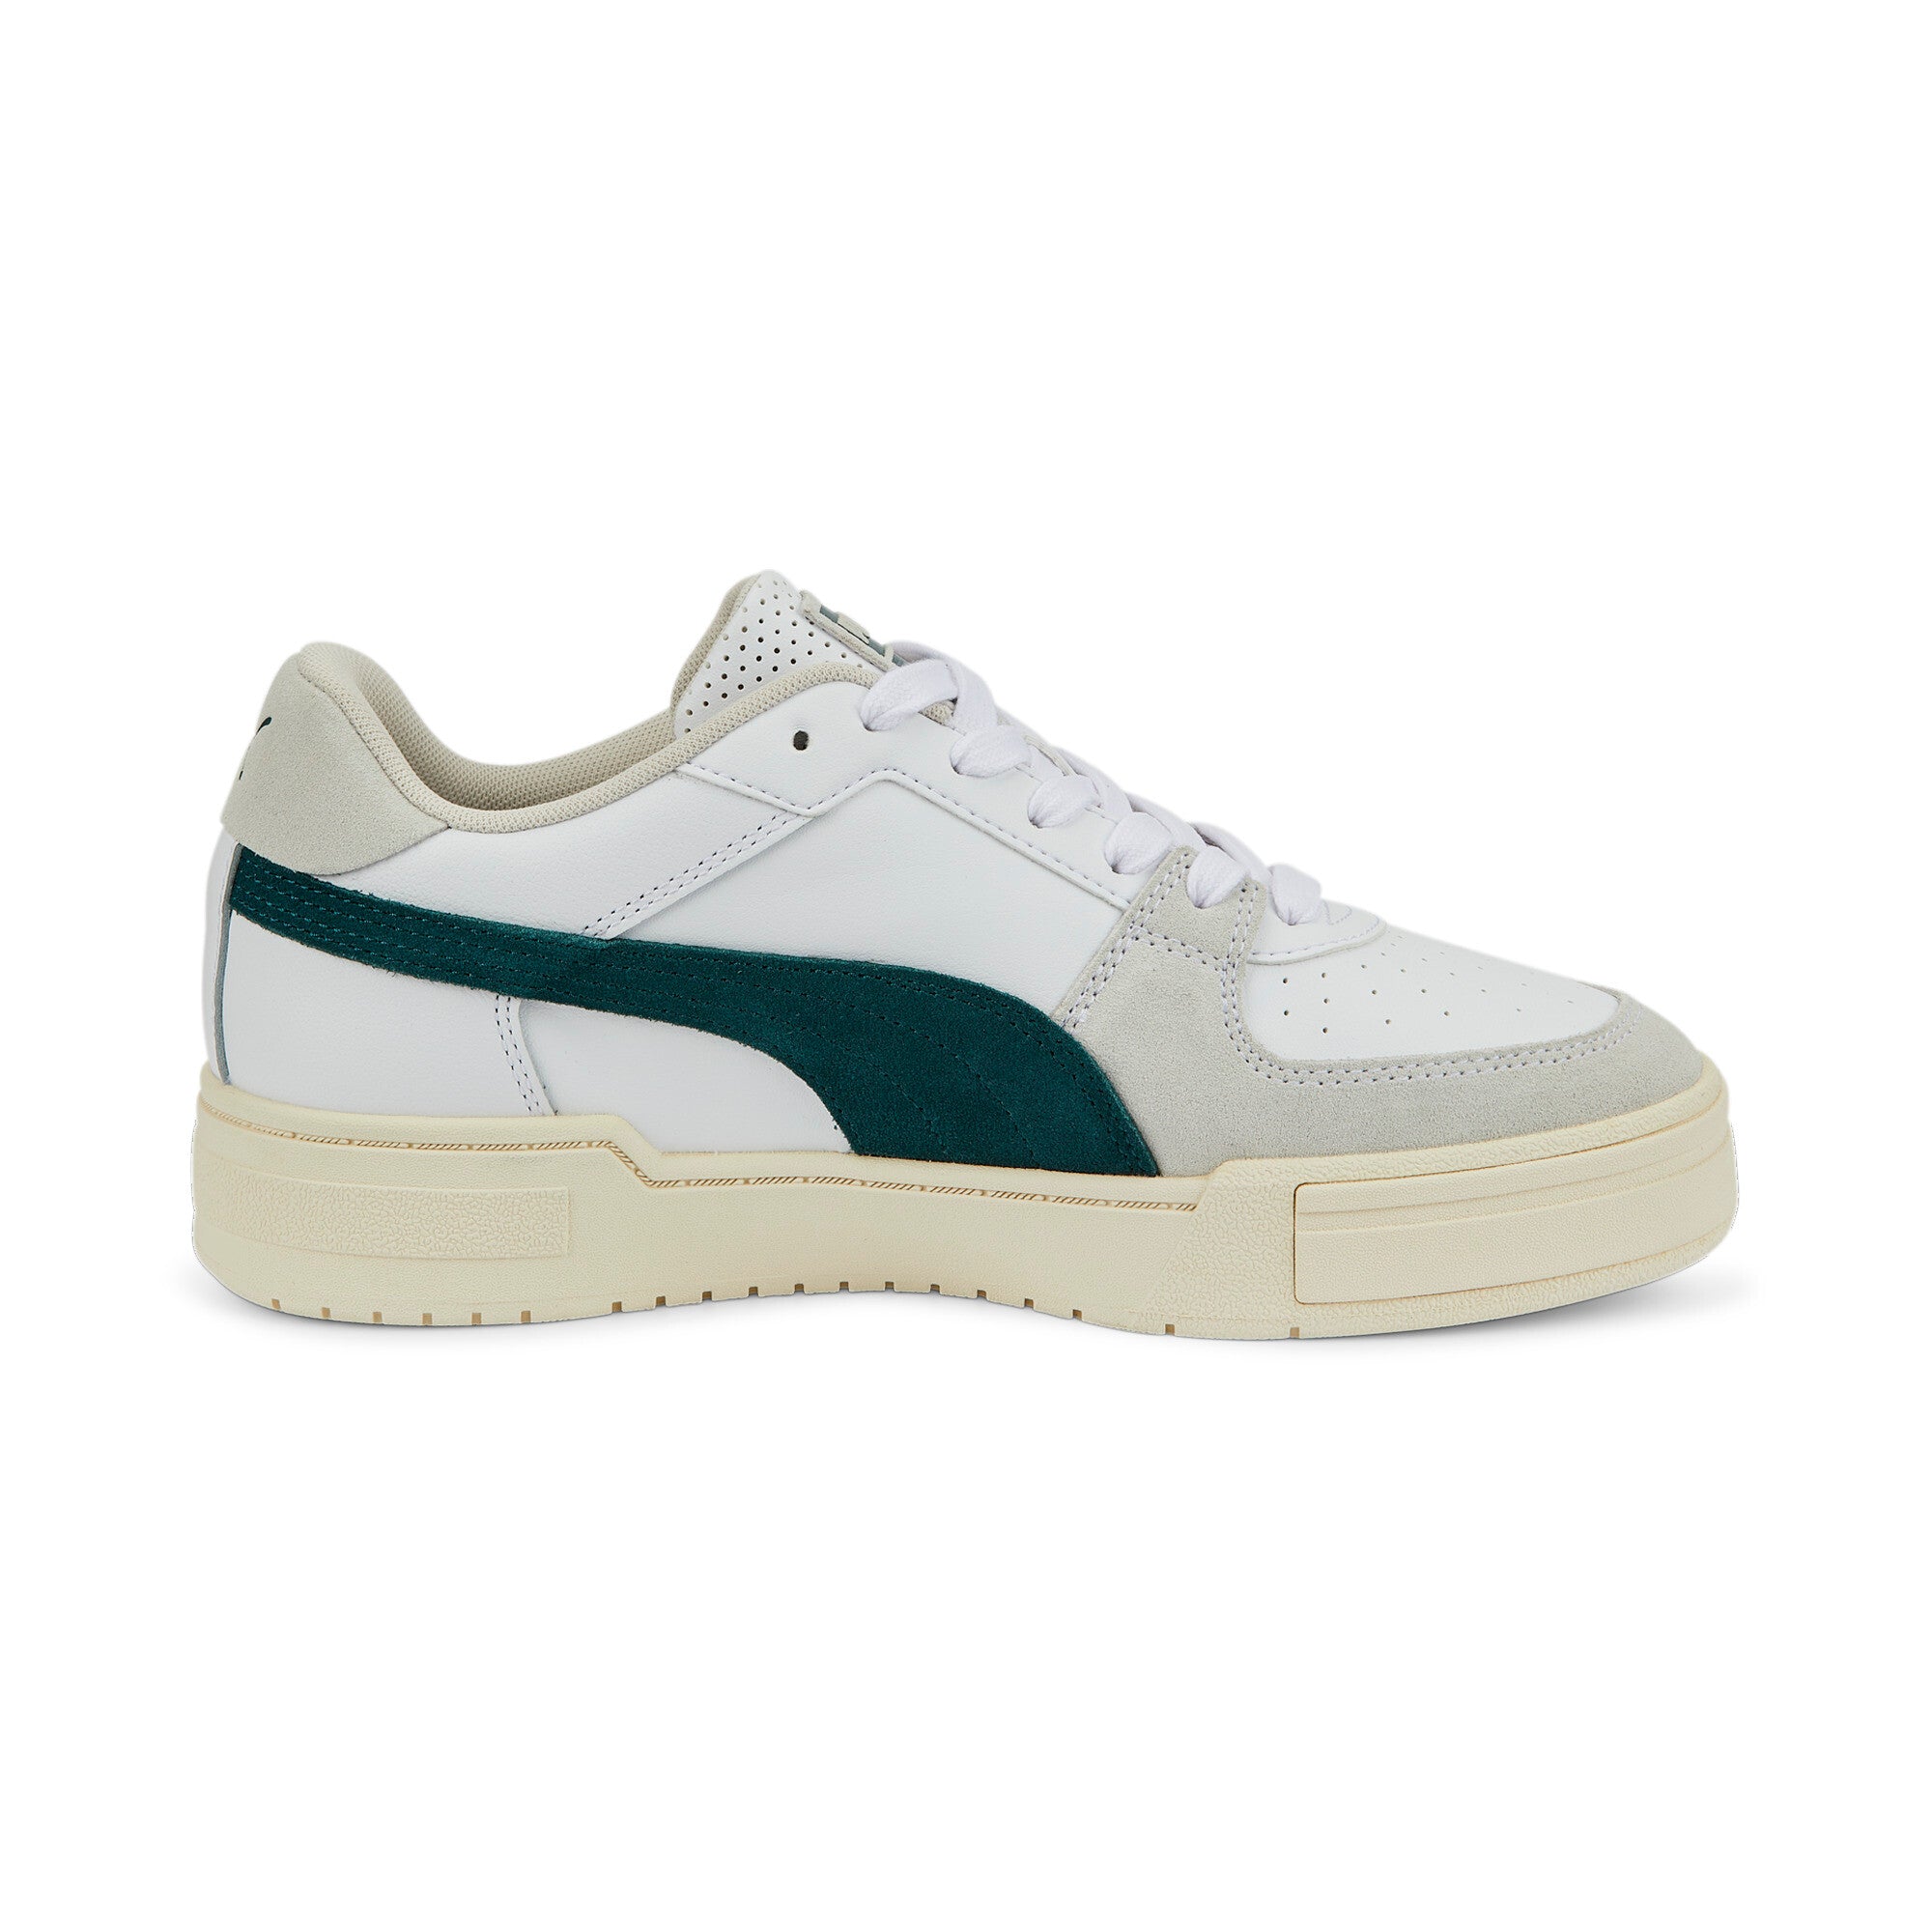 Add some old school style with the CA Pro Ivy League Athletic Shoe by PUMA! This archive-inspired sneaker adds a fresh touch to the California line with its sleek leather uppers, contrasting suede accents, and cushy rubber sole construction for comfort and traction.